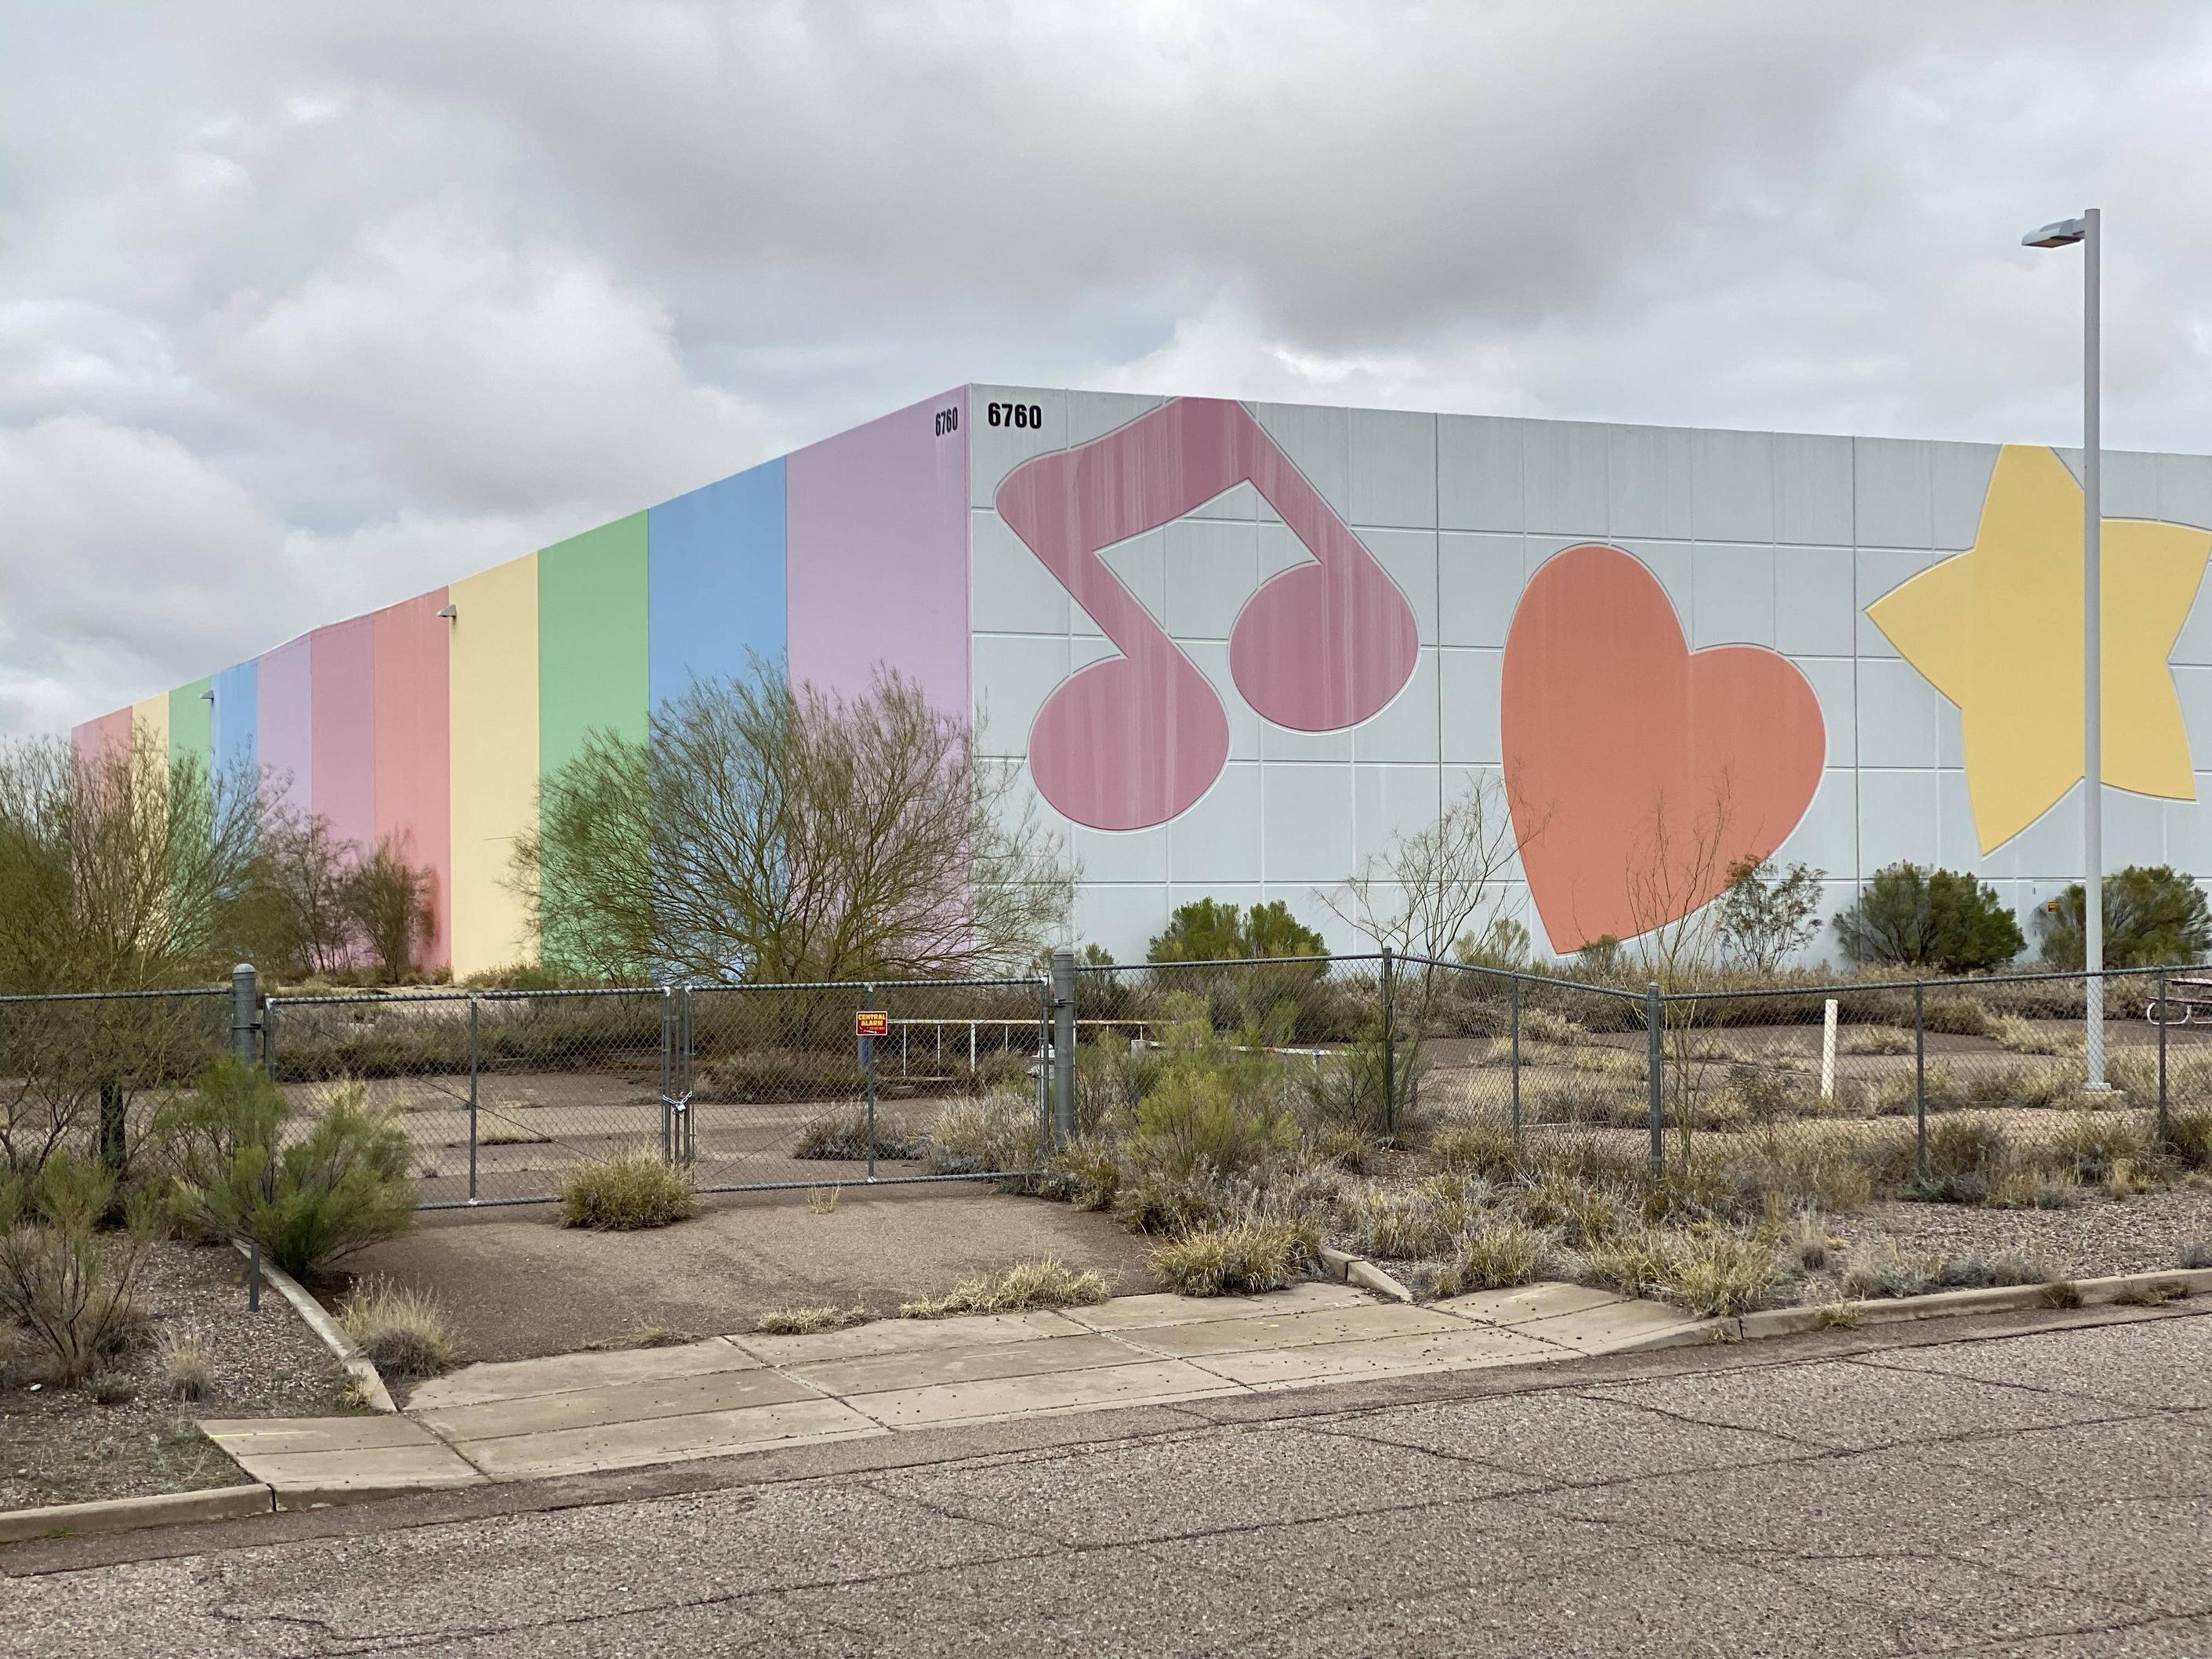 An abandoned Lisa Frank factory. RIP in Trapper Keeper.